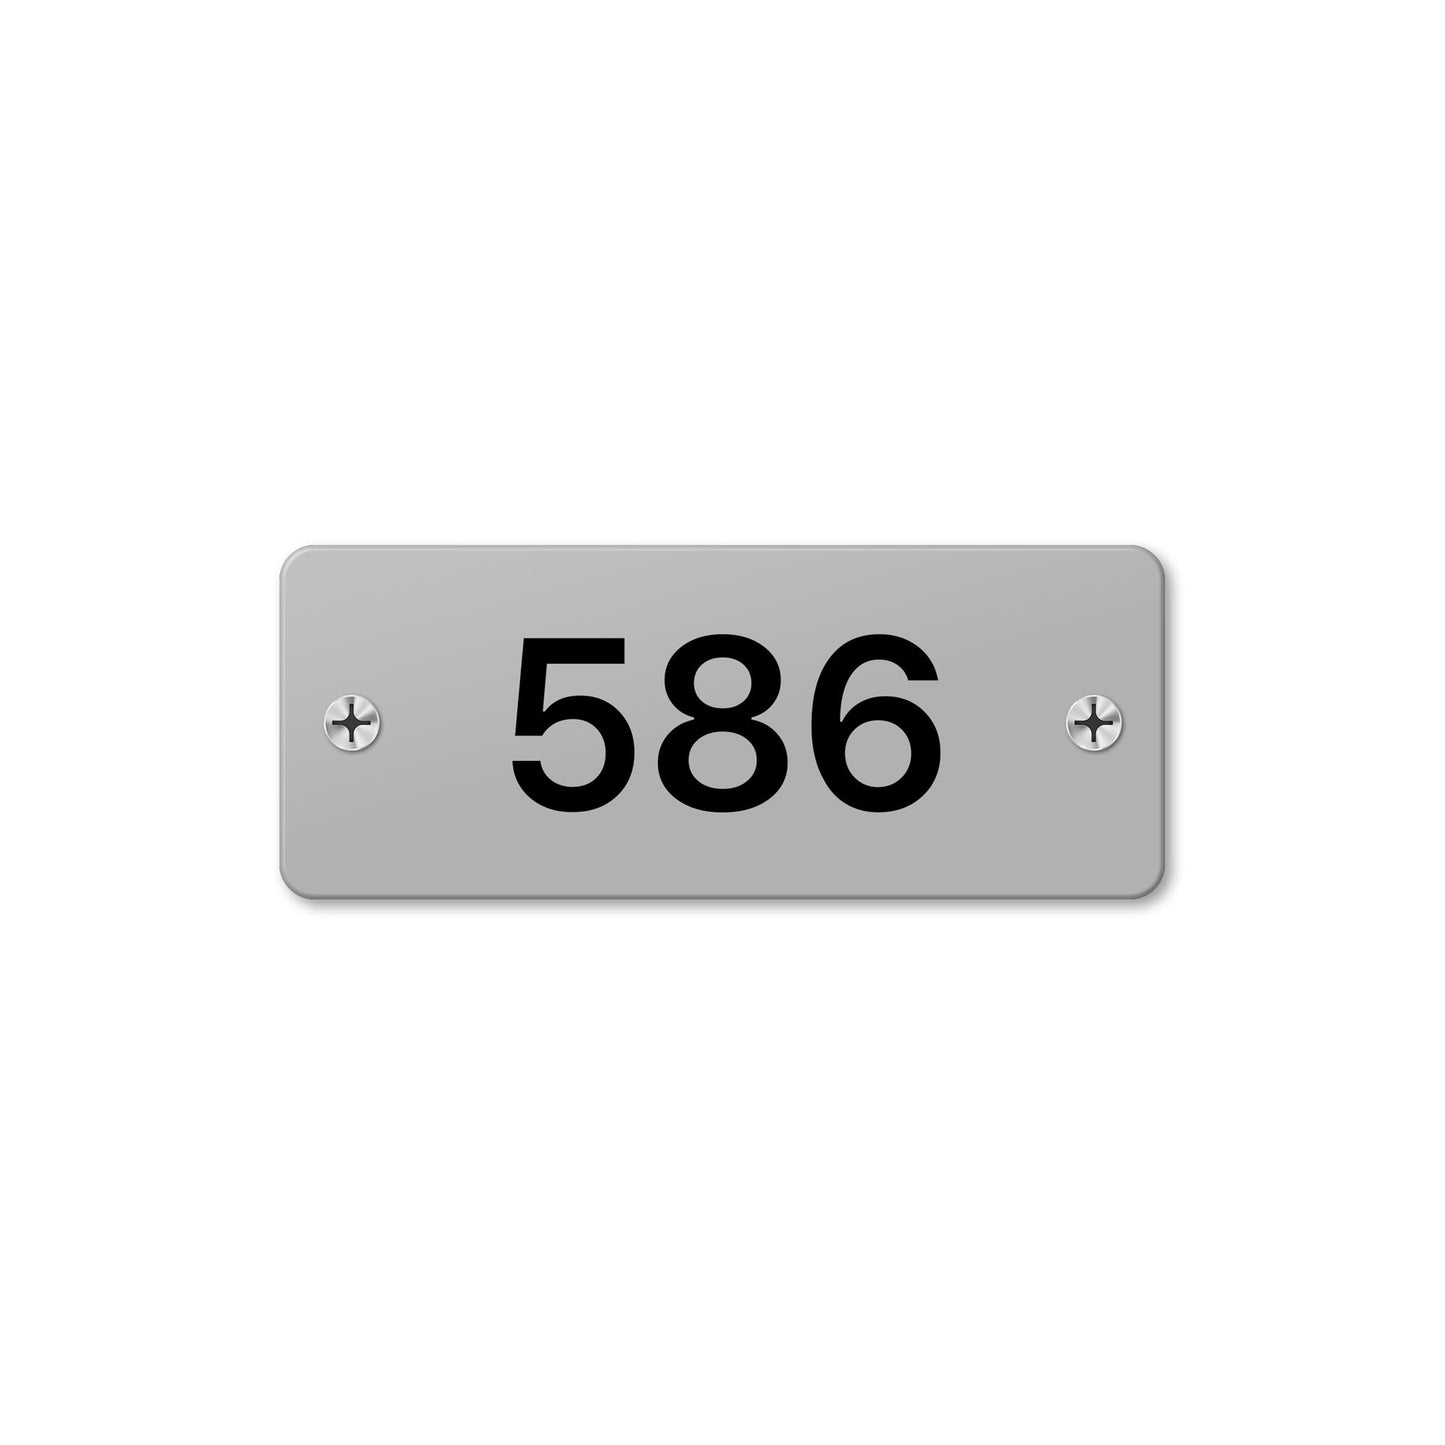 Numeral 586